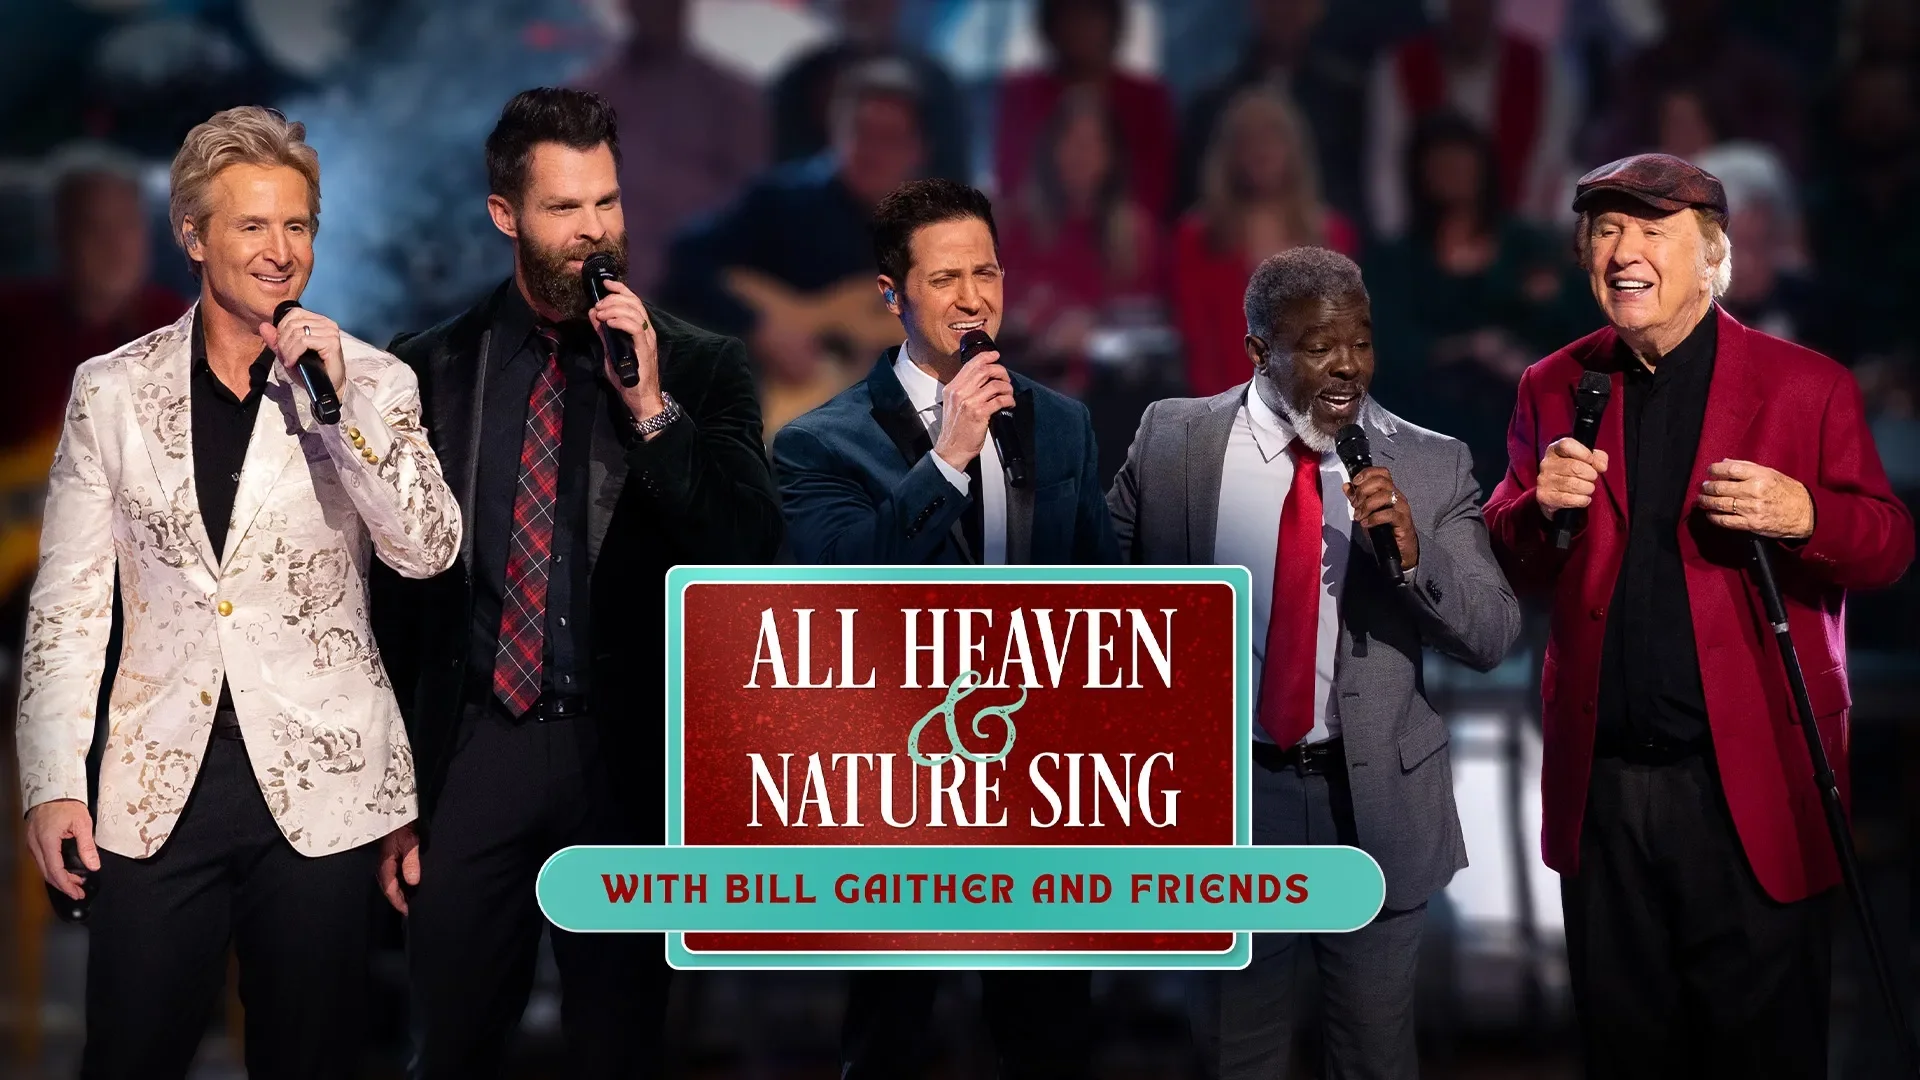 All Heaven & Nature Sing with Bill Gaither & Friends